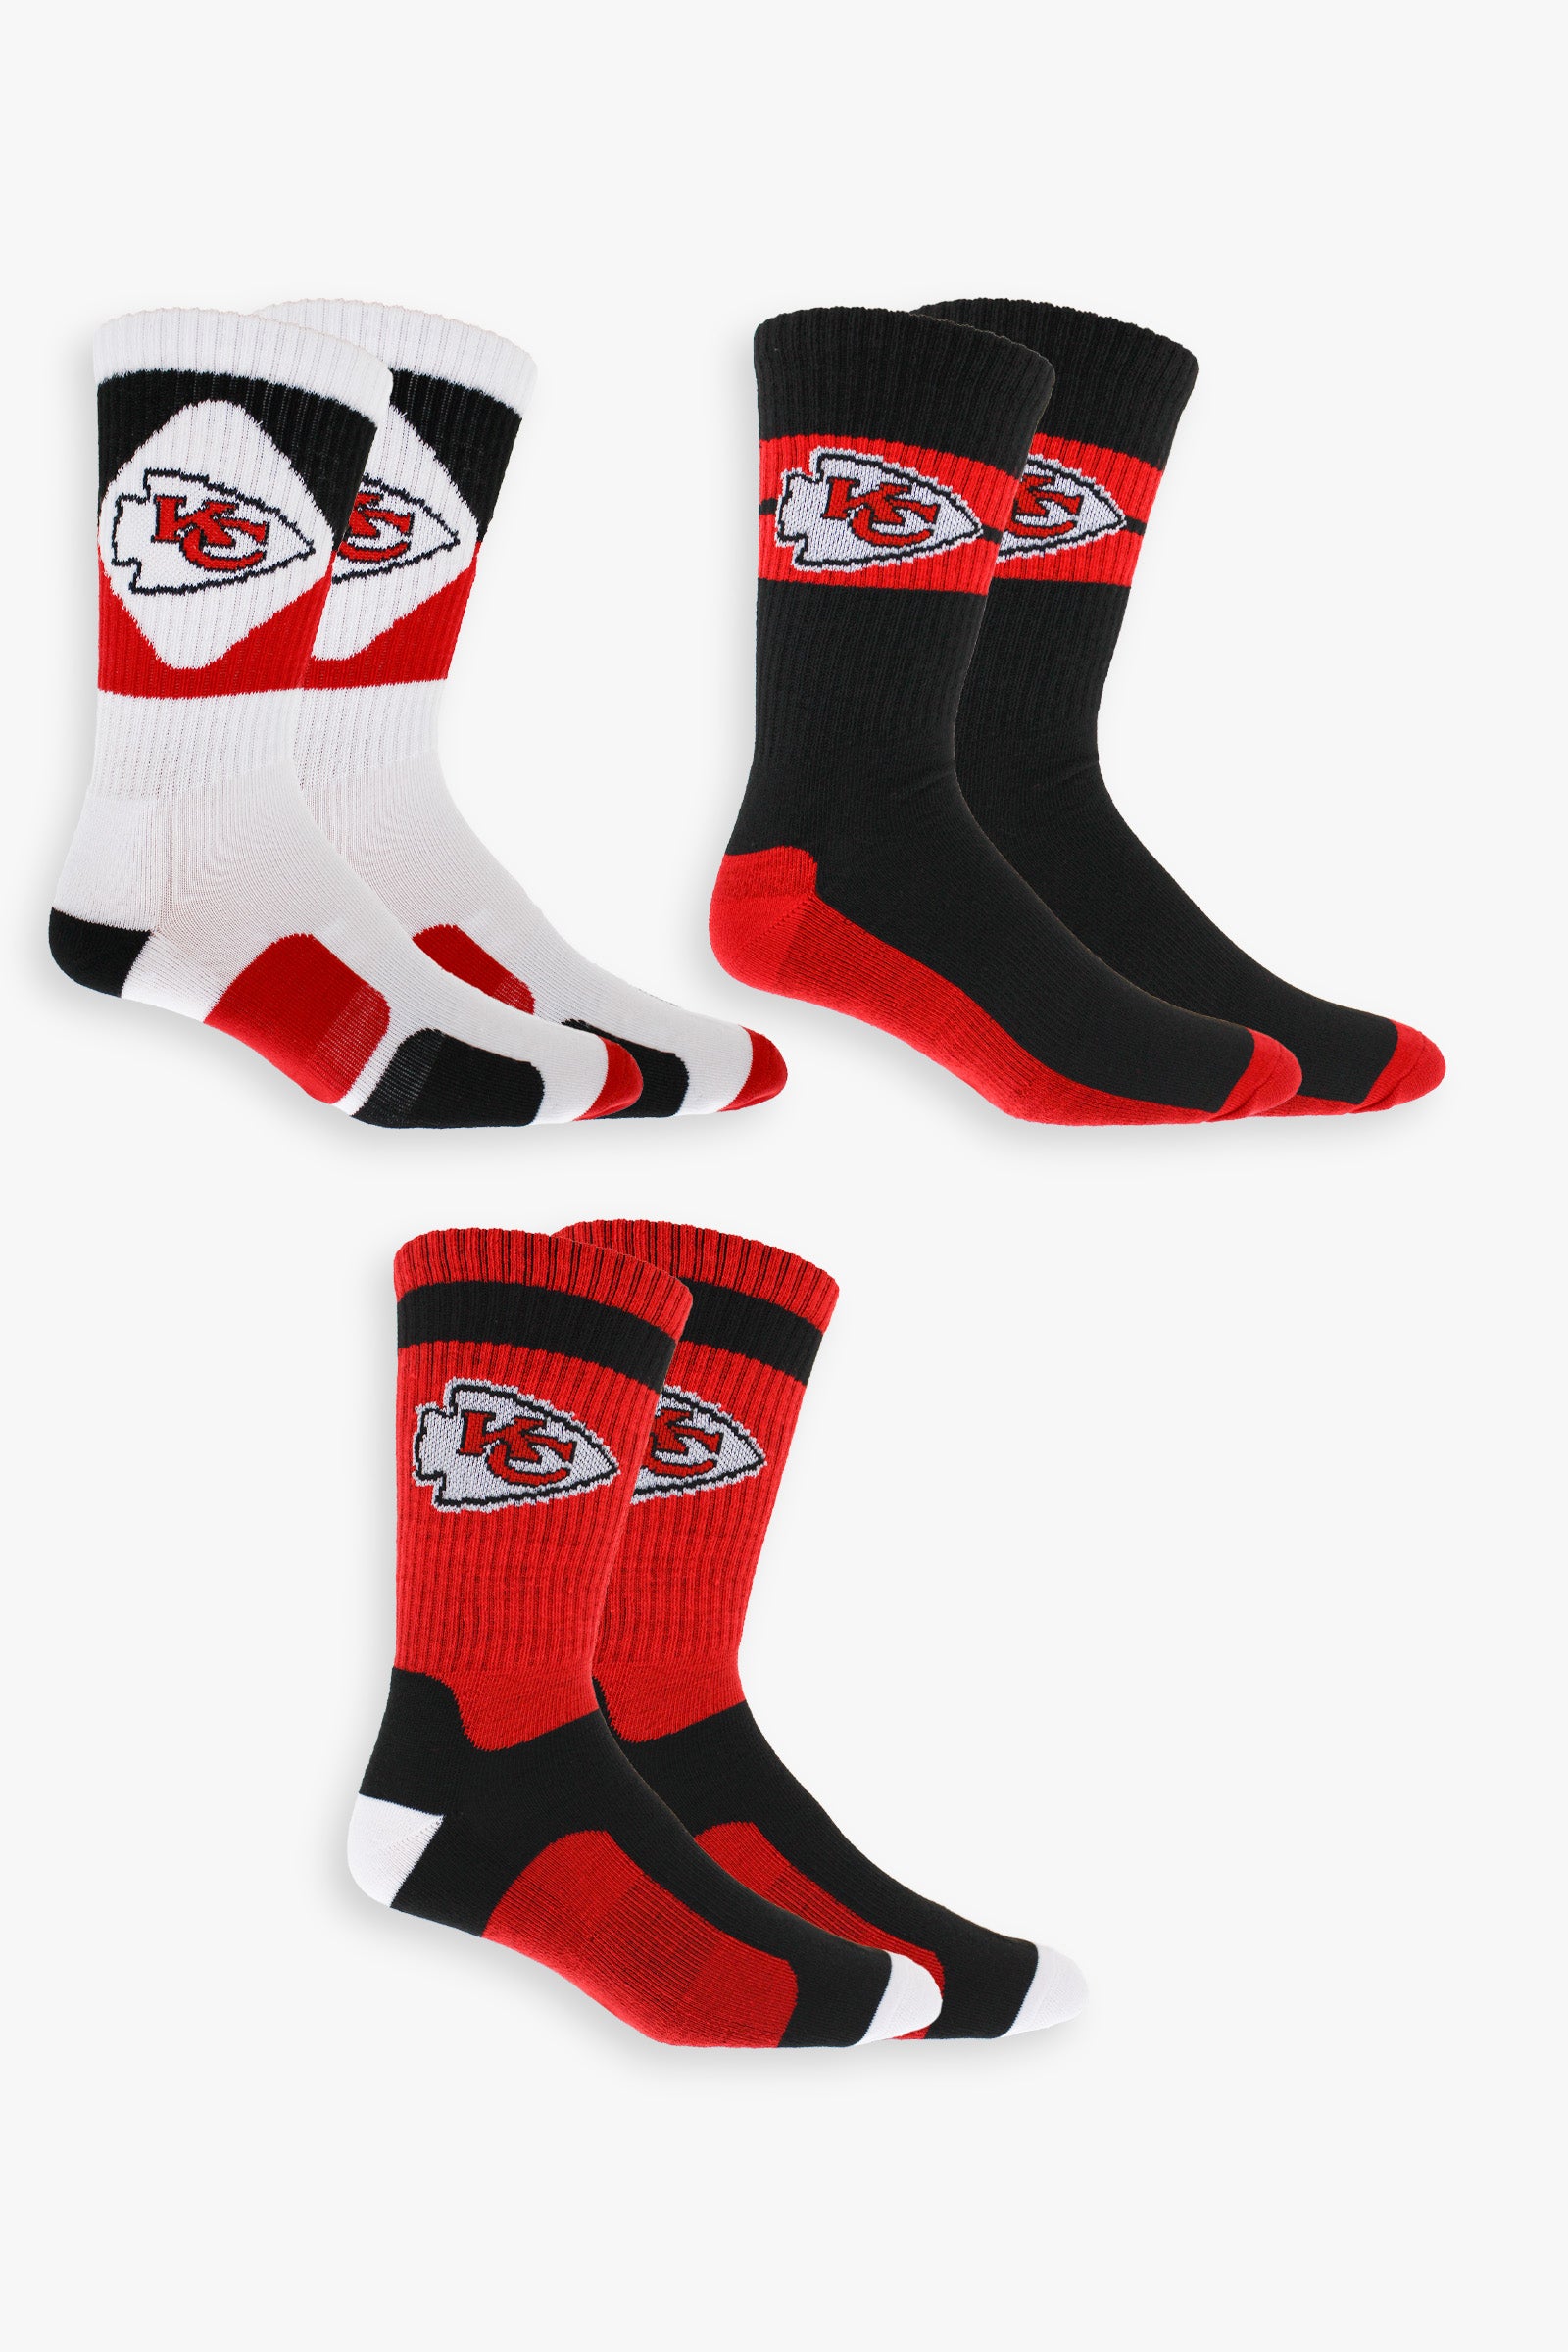 NFL Men's 3-Pack Sport Crew Fan Socks | Sock Size 10-13 | Ribbed, Arch Support, Cushioned Sole | Football Team Variations